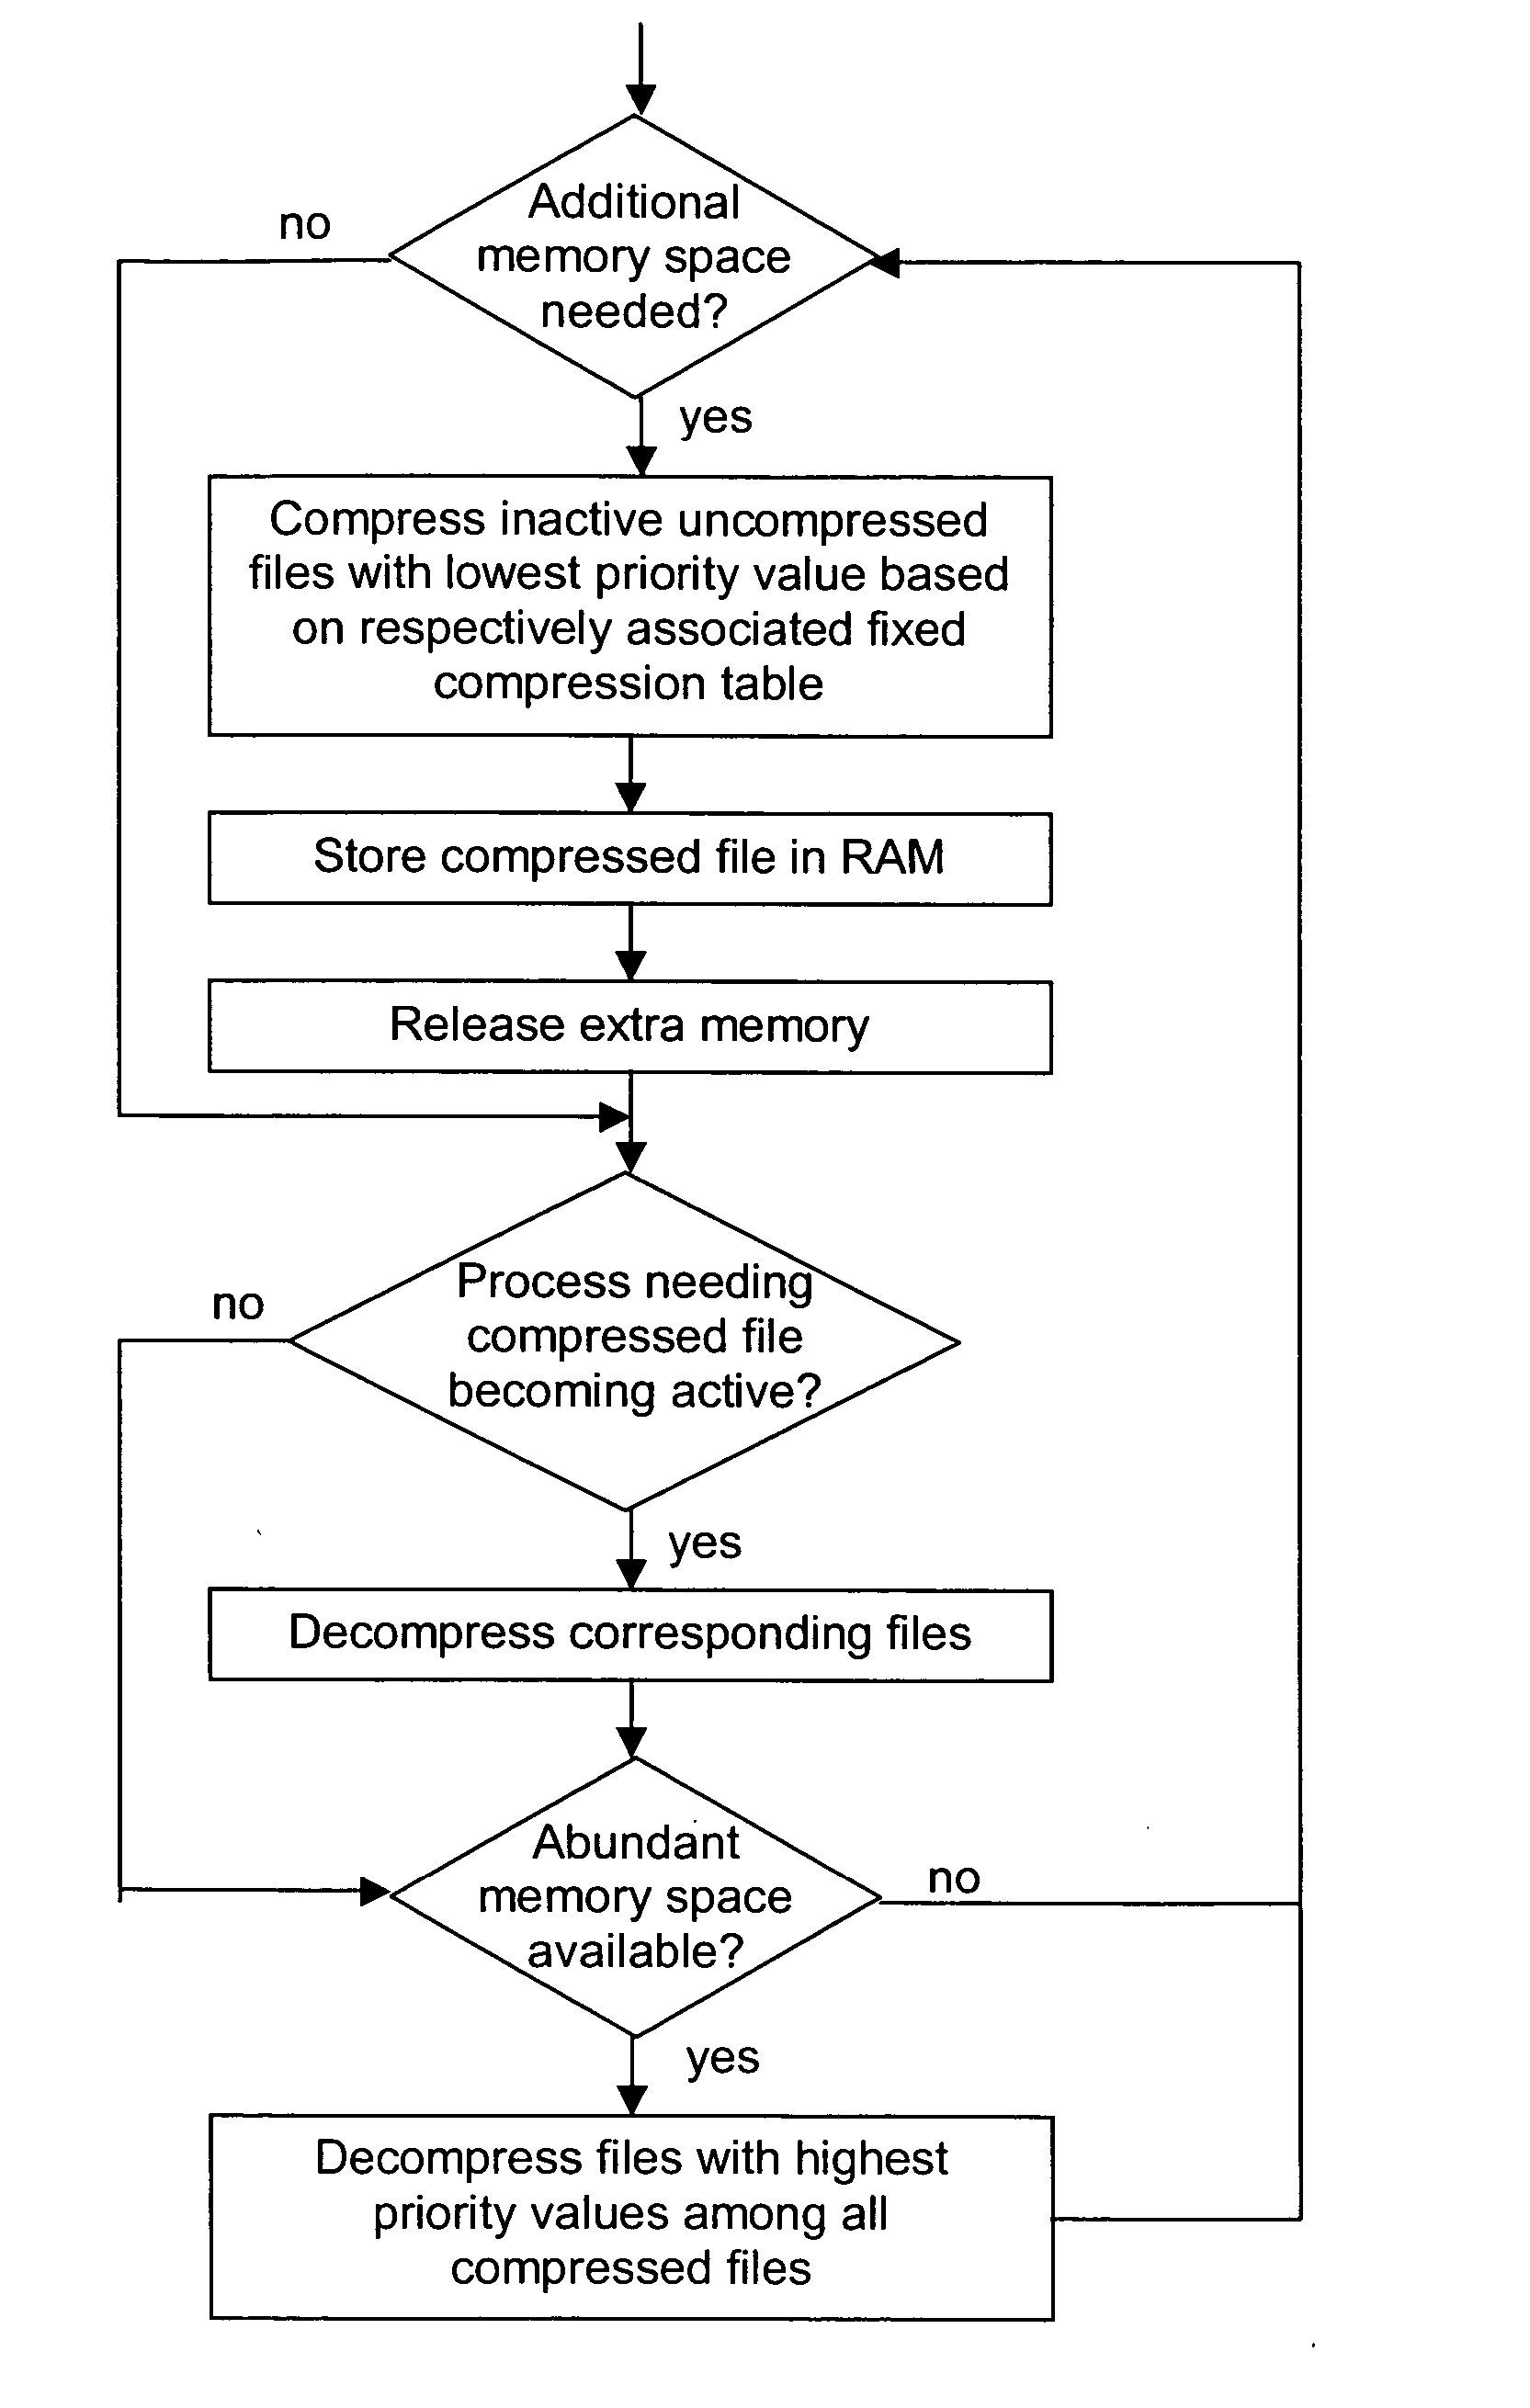 Creation of virtual memory space in a memory